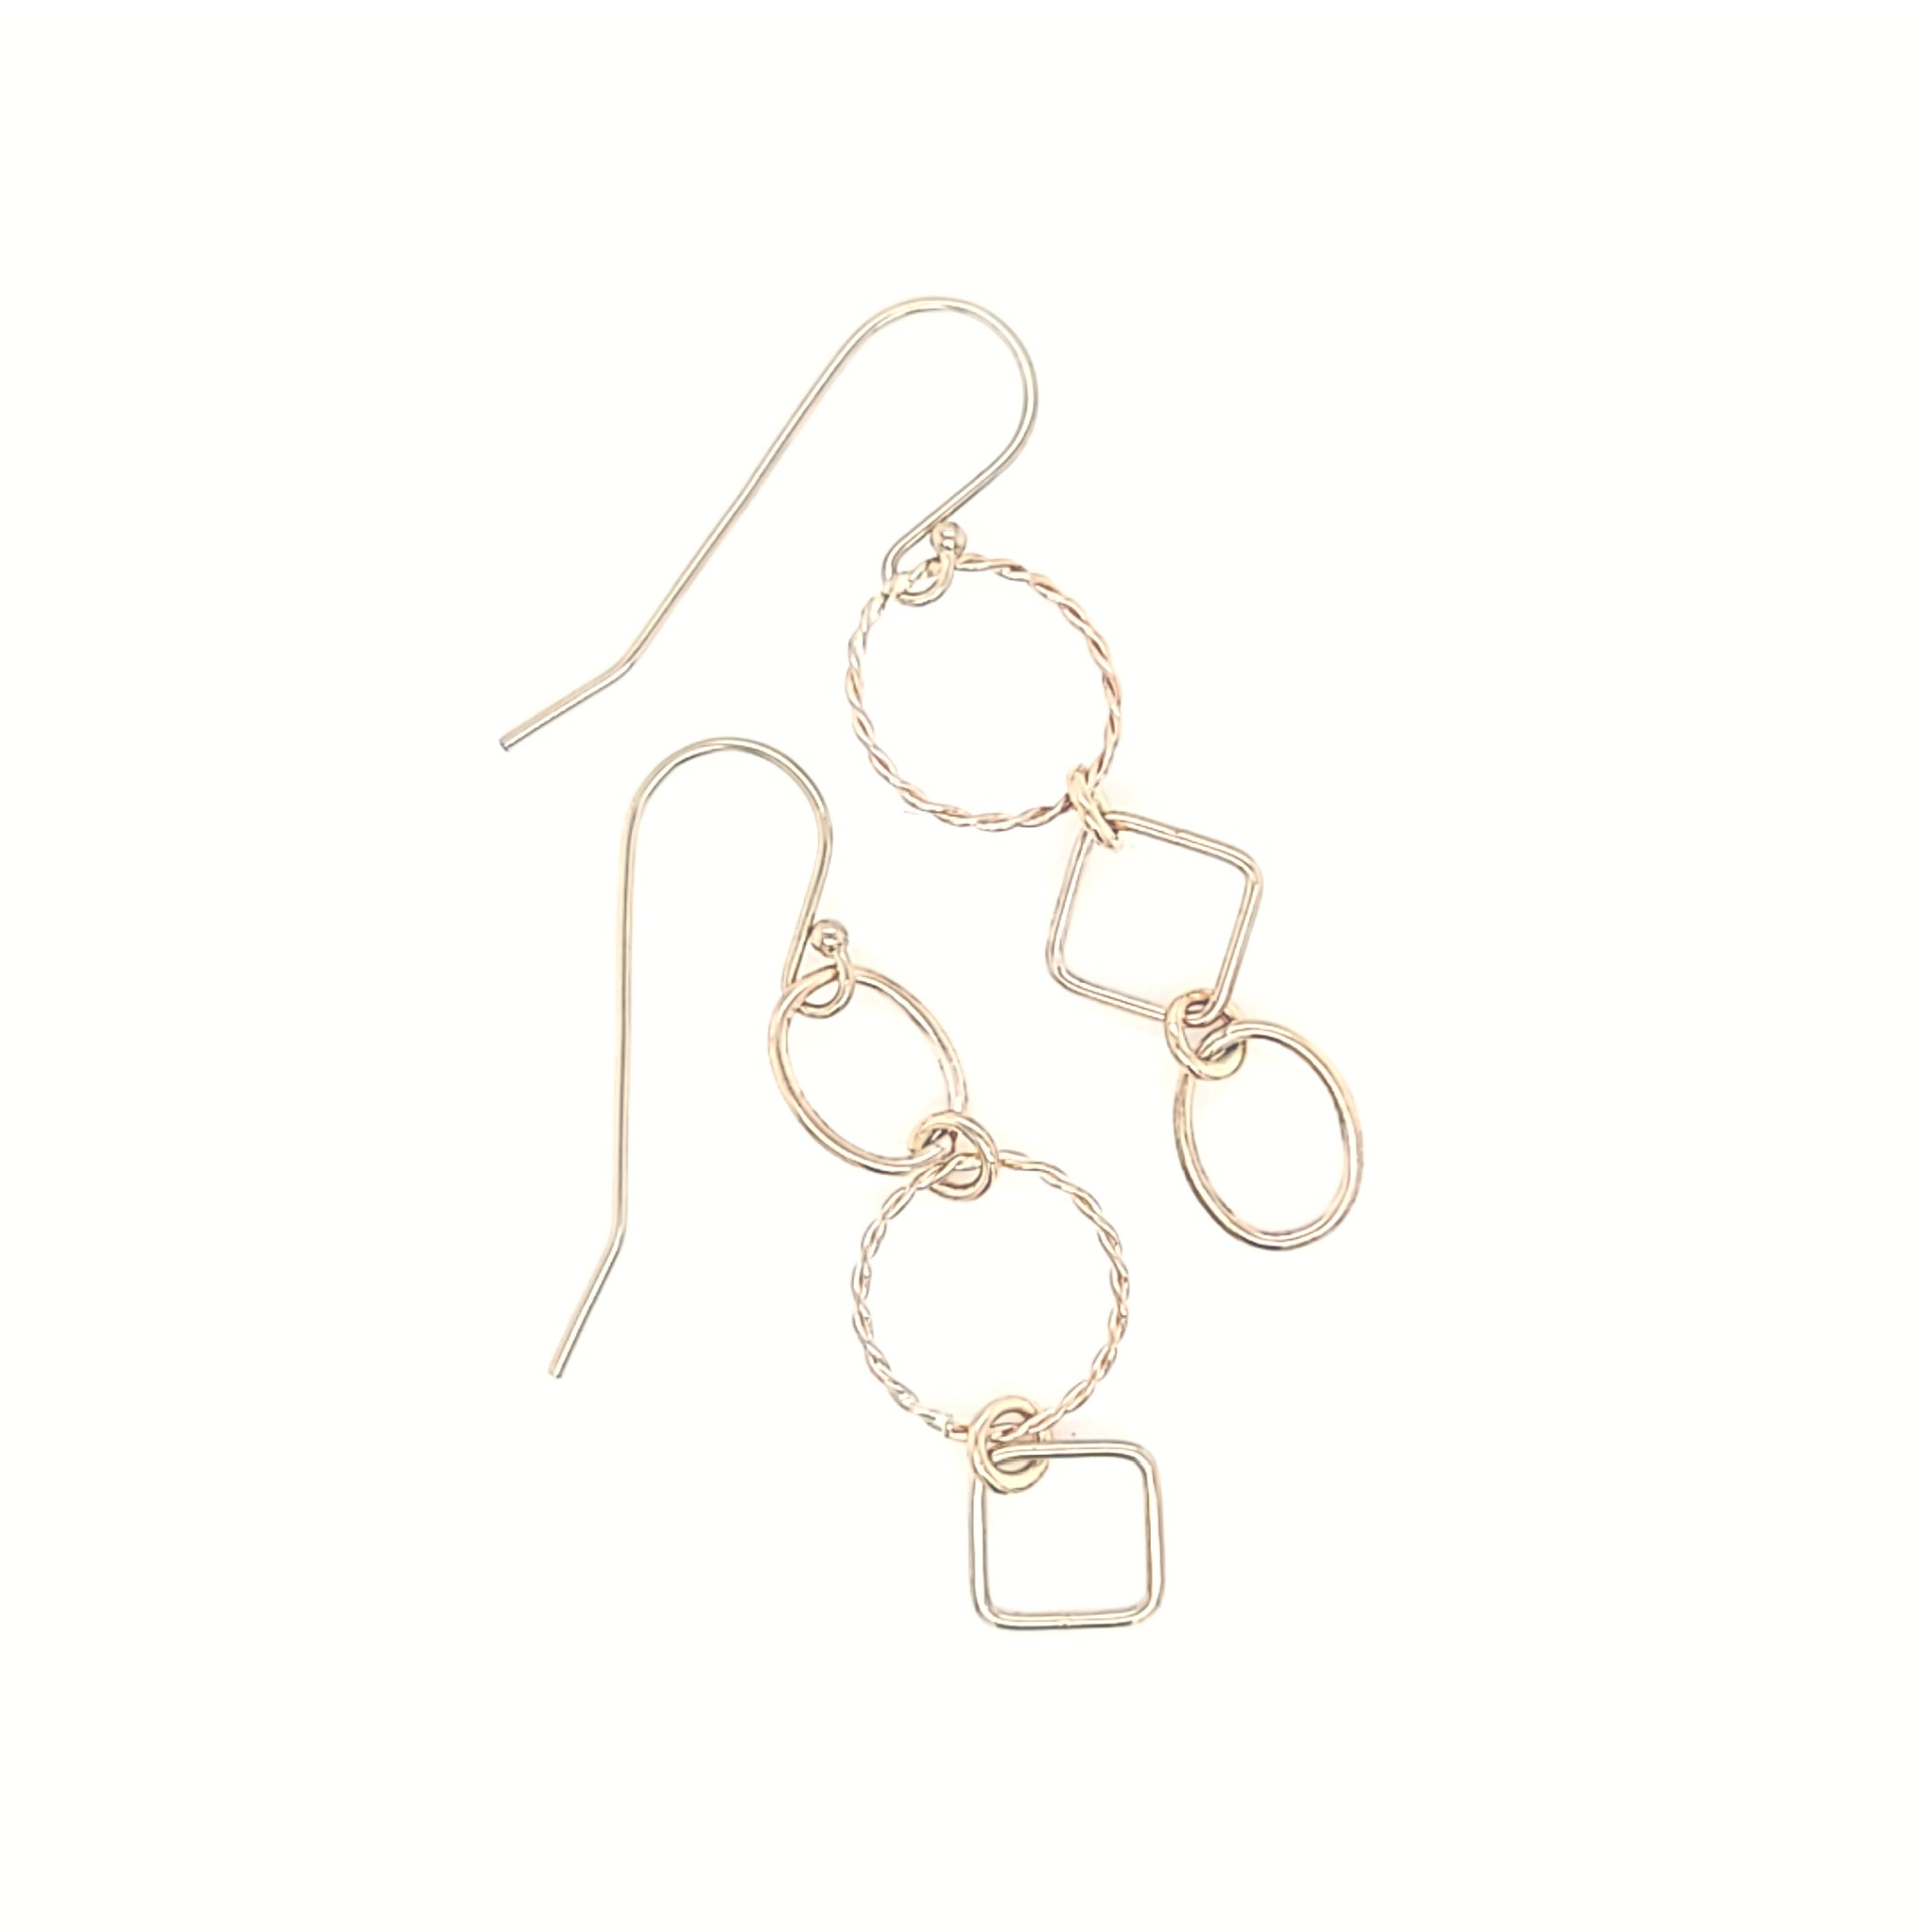 Oval, Square and Twisted Circle GF Earrings